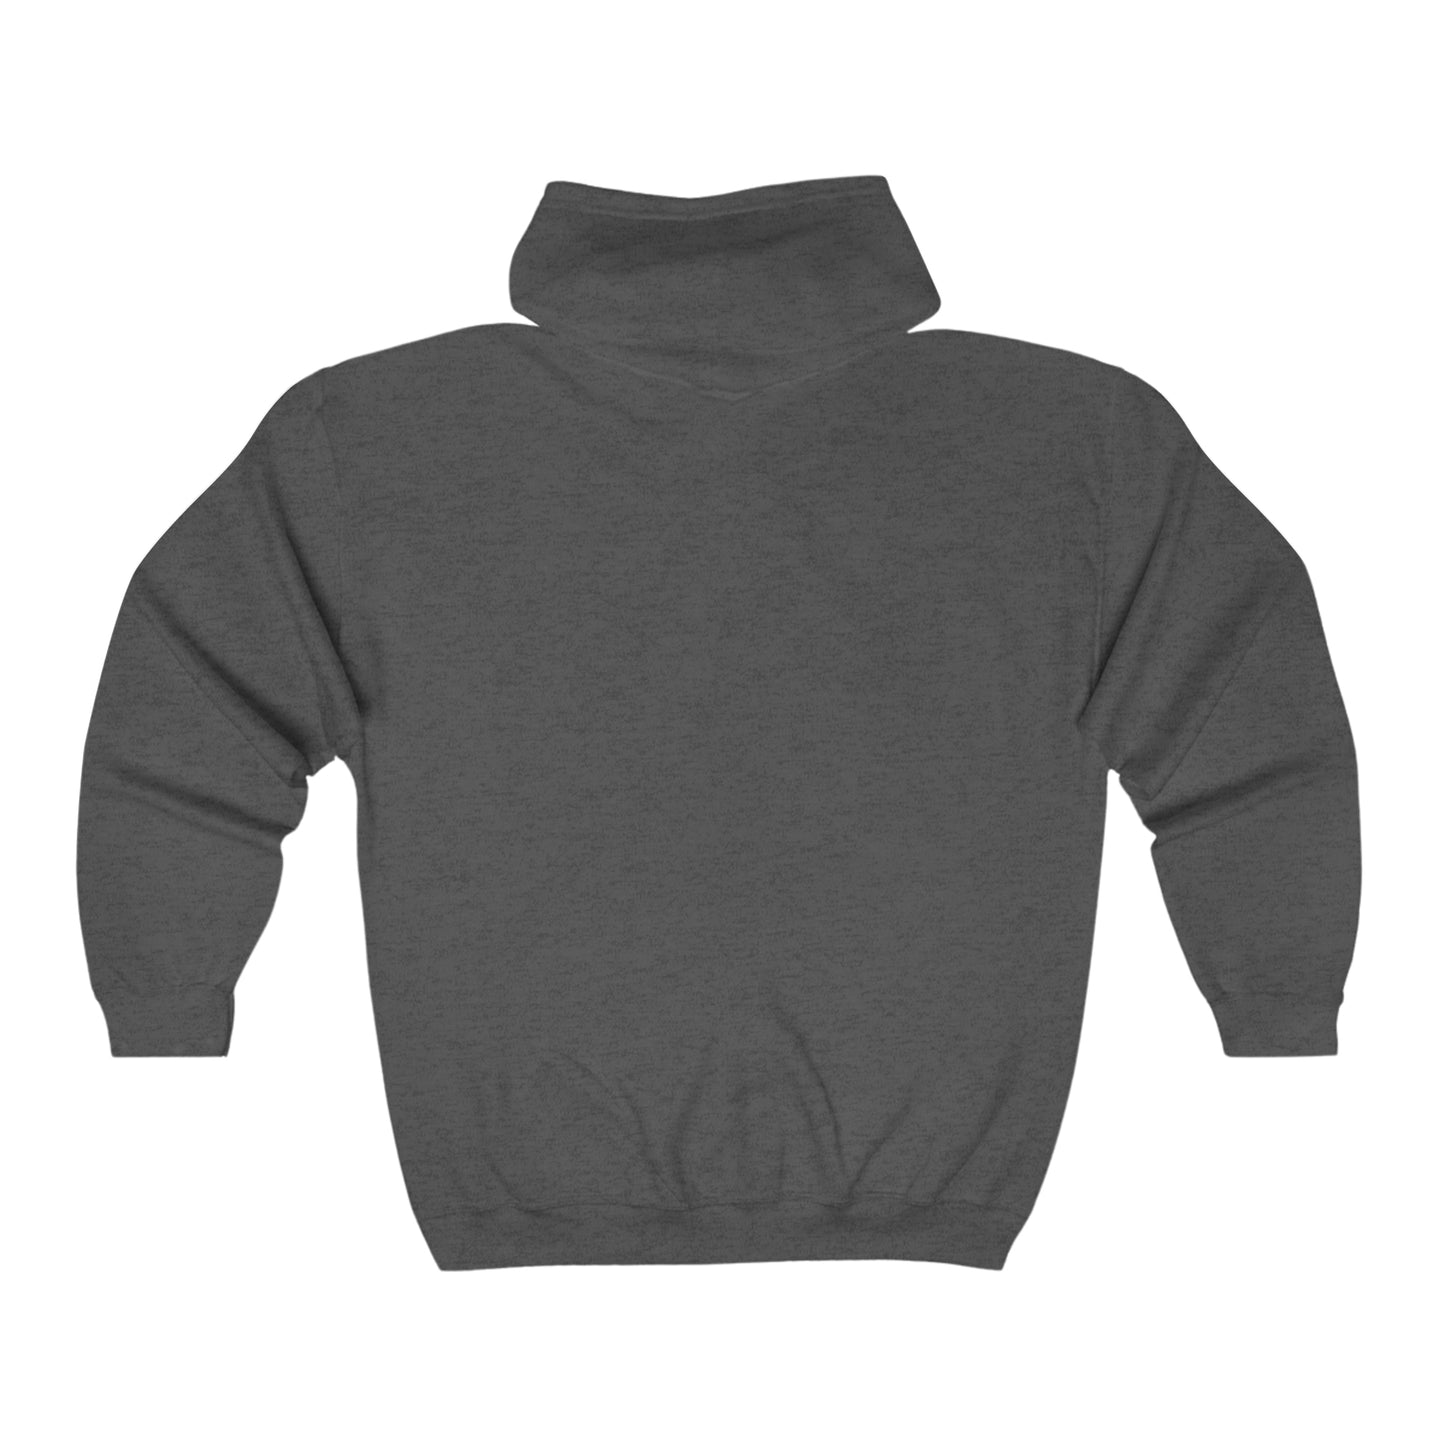 a gray sweatshirt with a hoodie on it